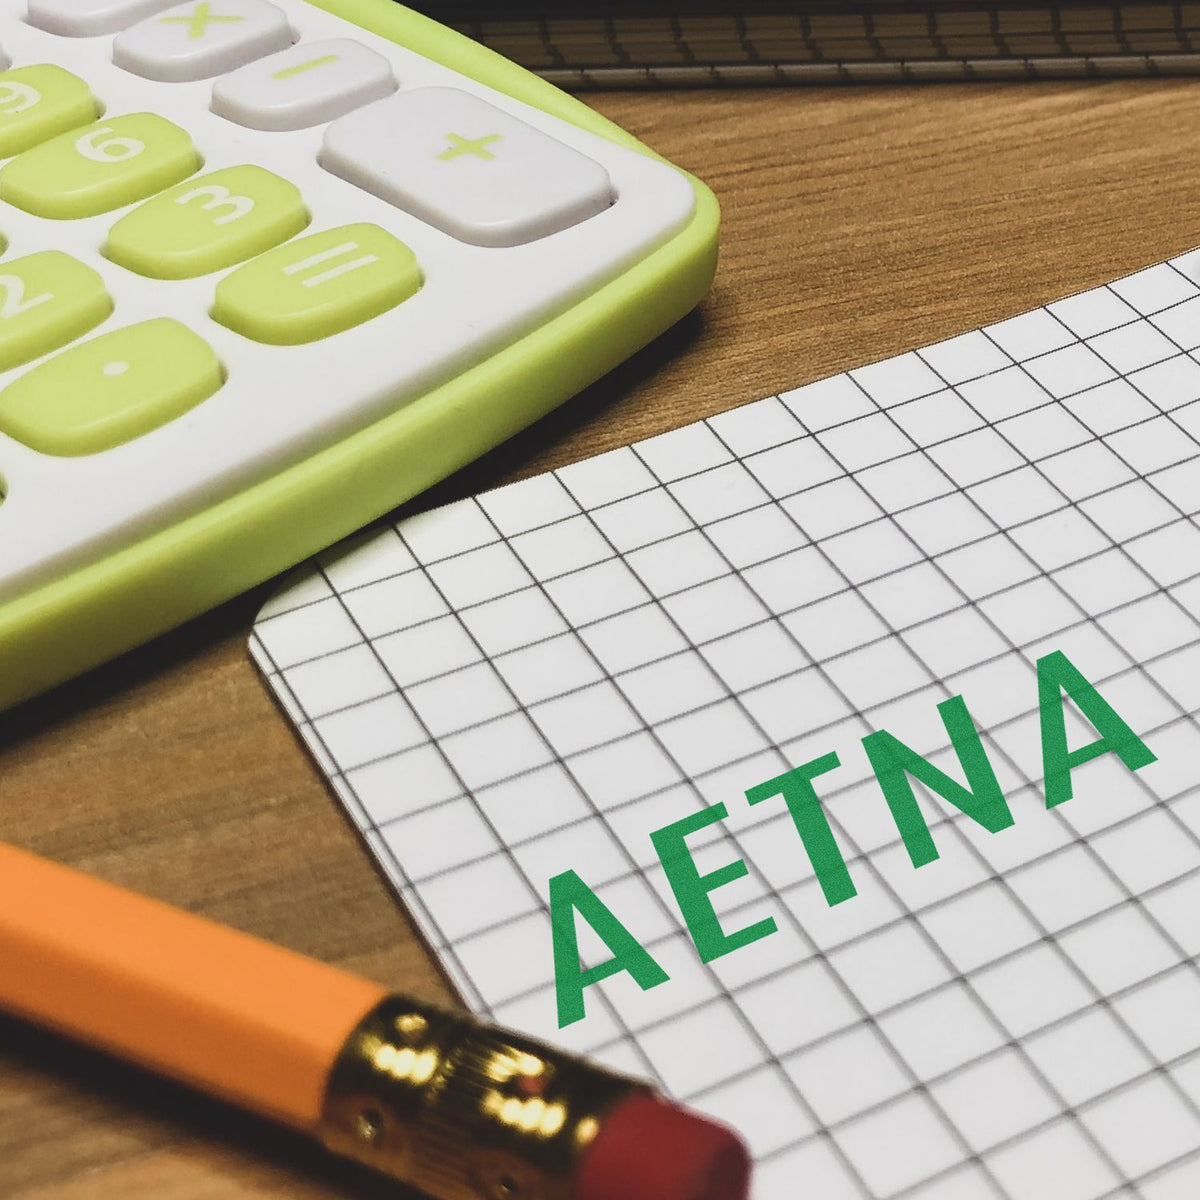 Large Self-Inking Aetna Stamp In Use